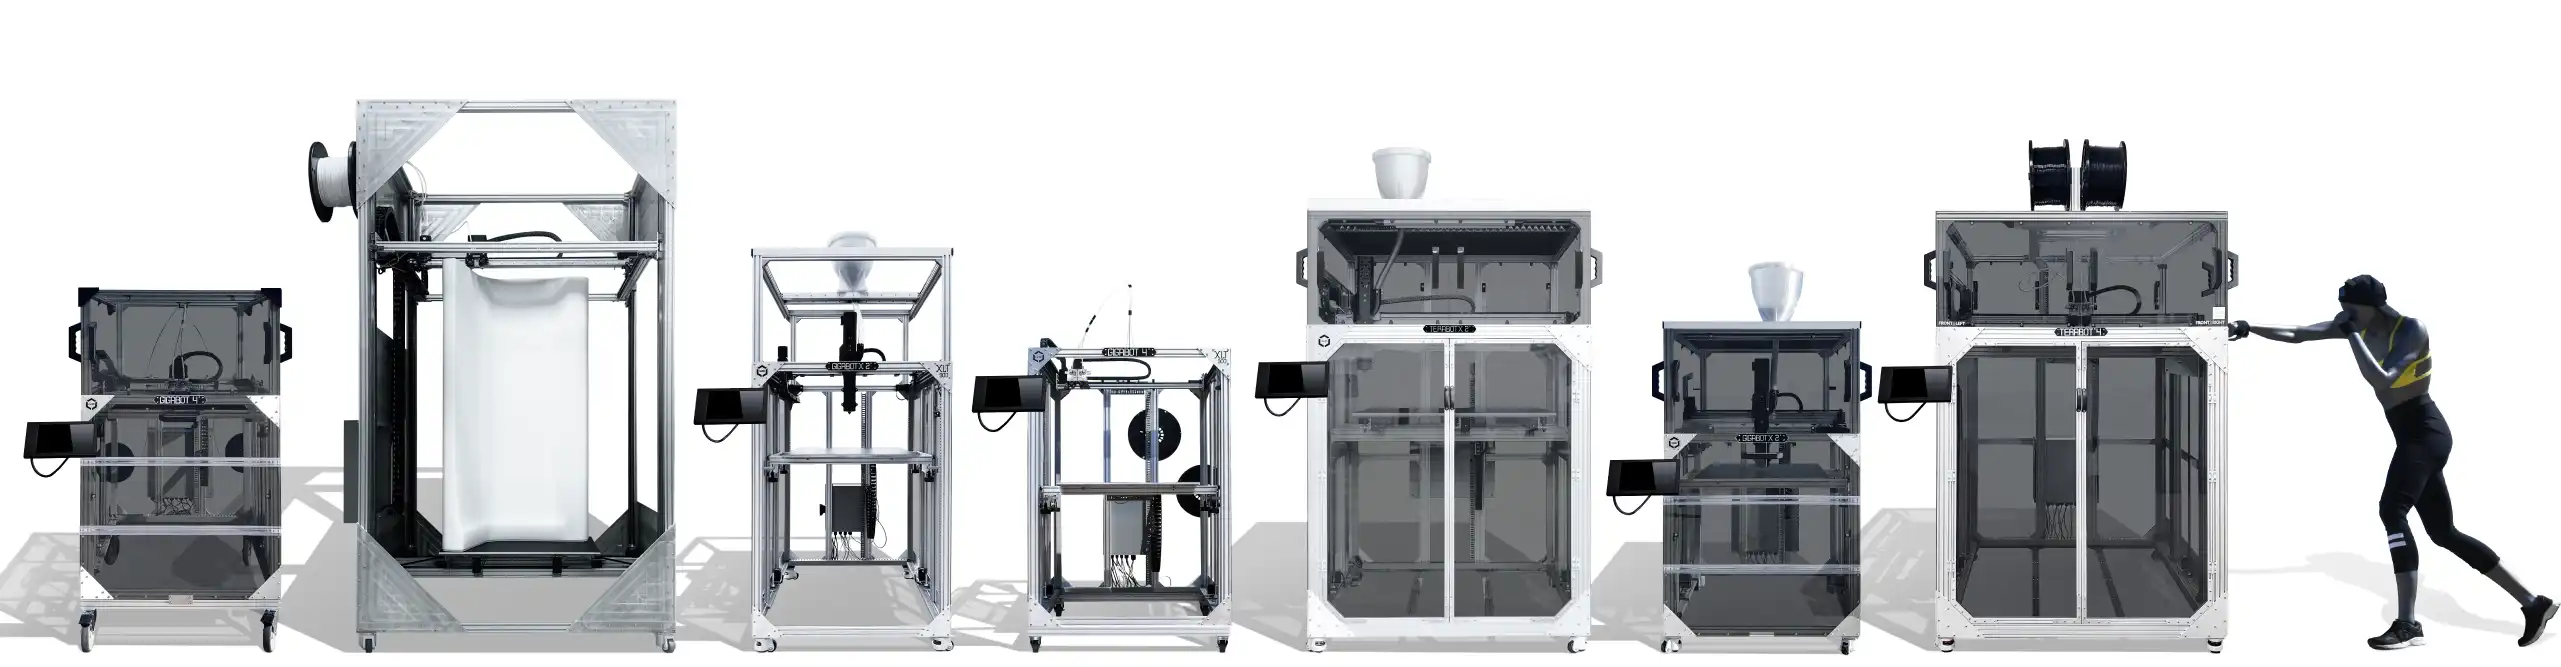 Gigabot and GigabotX 3D printers with a 3D printed mannequin